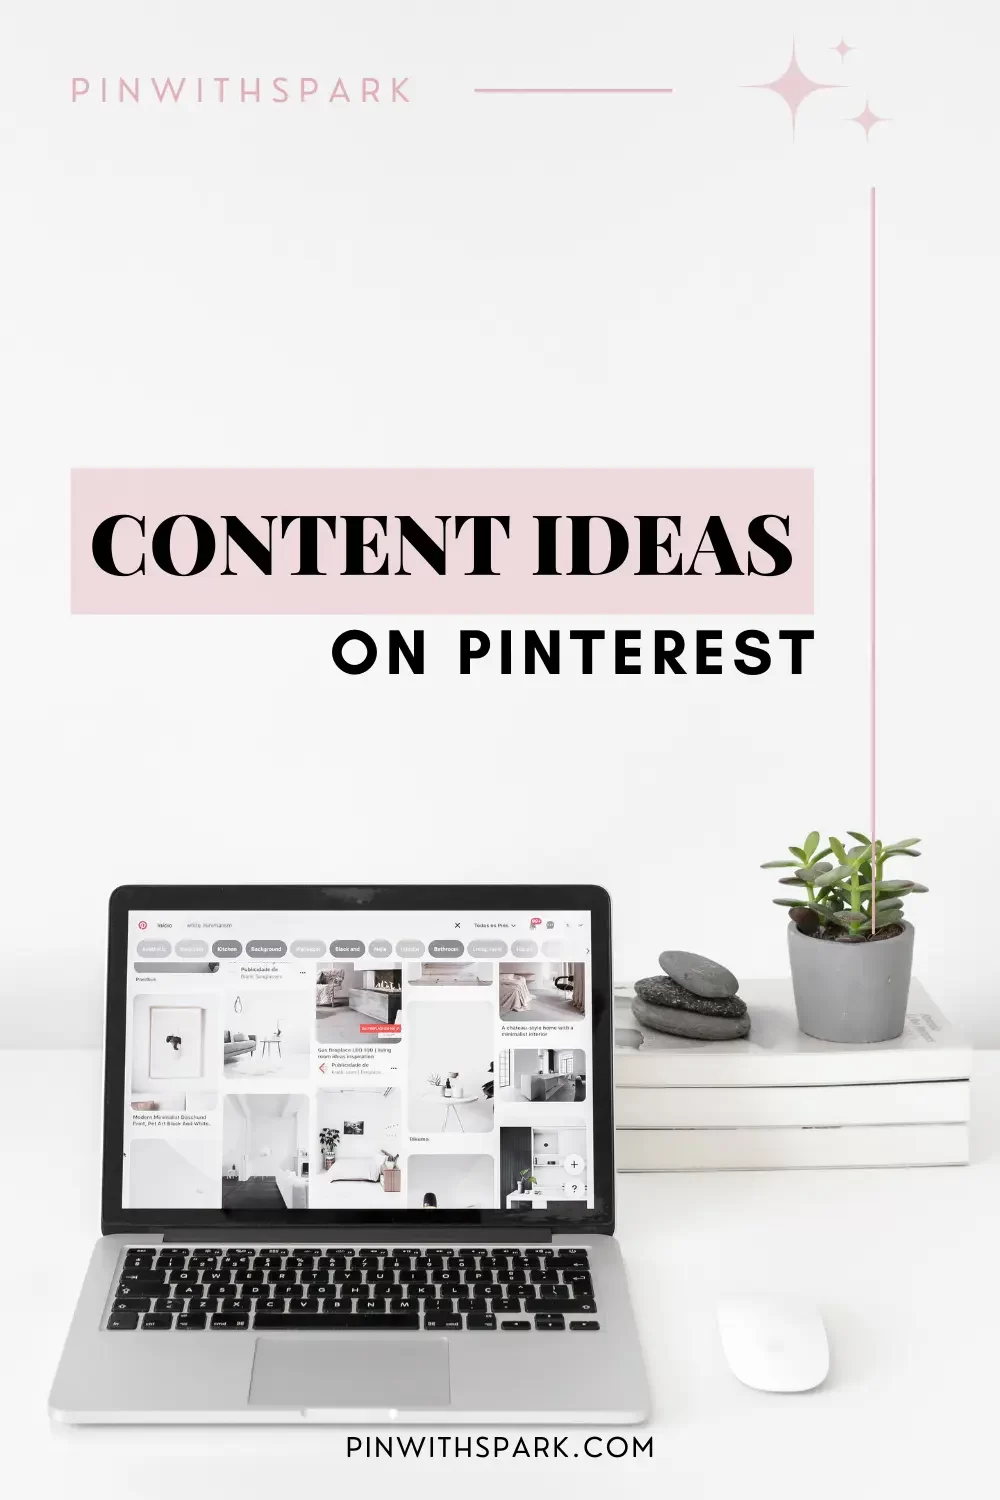 Laptop open with Pinterest home feed on screen with content ideas on Pinterest in text overlay, pinwithspark.com